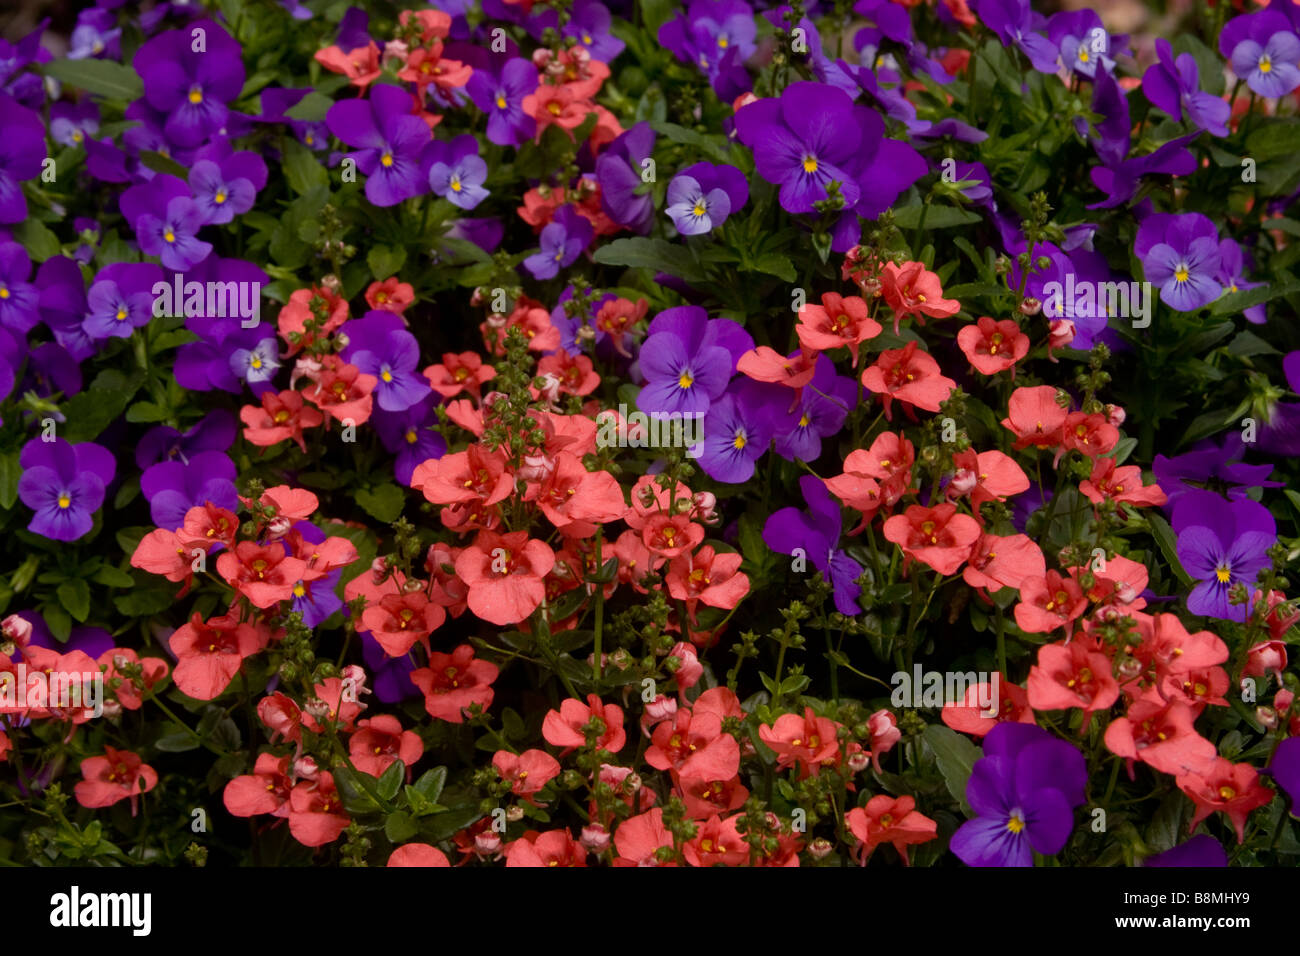 Pink diascia 'Coral Belle' and purple violas (hybrid unknown) grow together in a bed in South Carolina, USA. Stock Photo